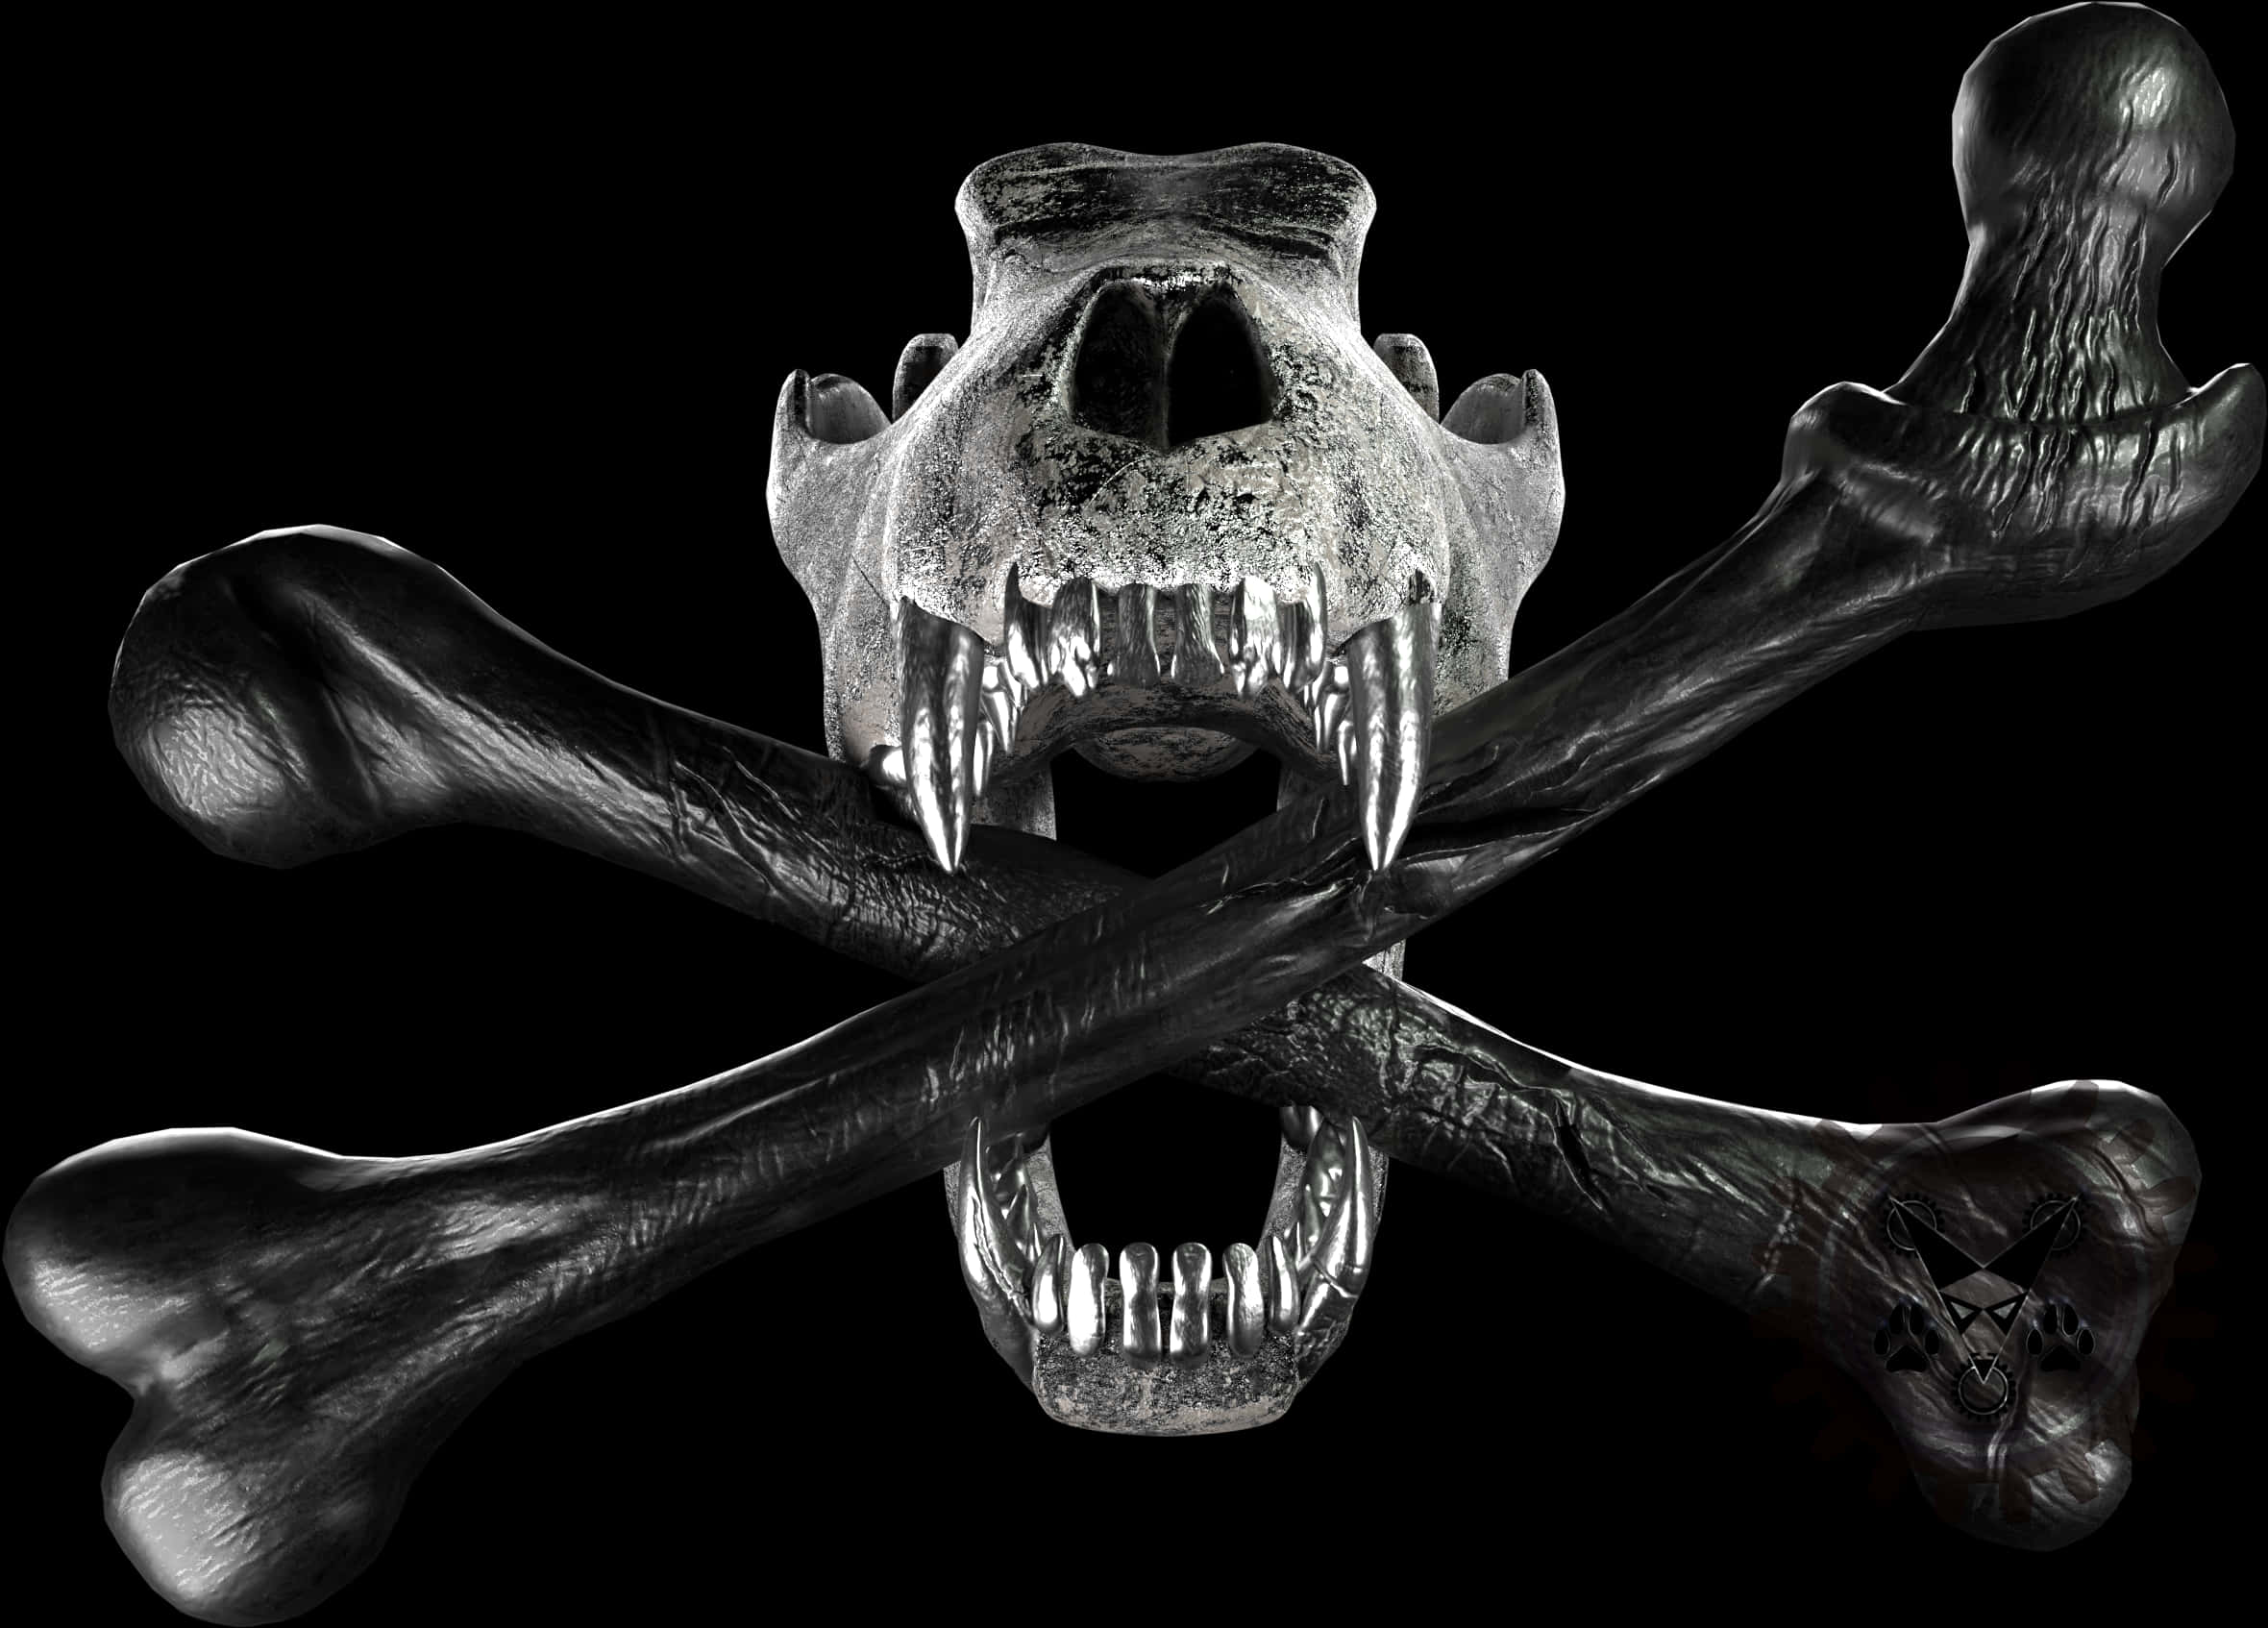 A Skull And Crossbones With Teeth